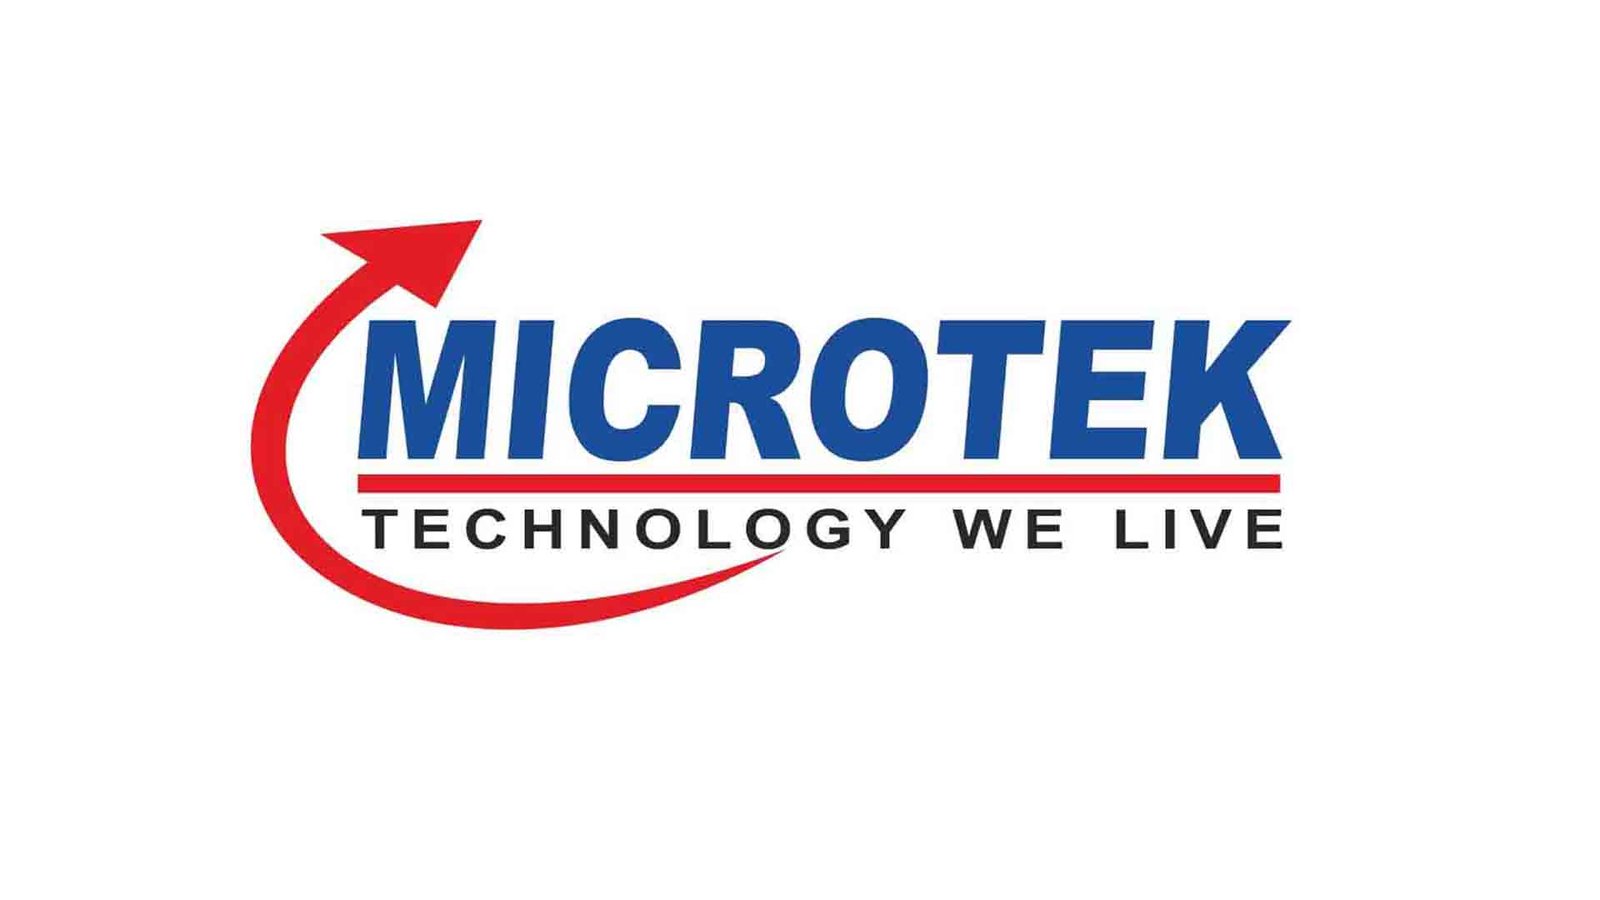 Microtek is geared up for 50 per cent growth in FY 2022-23